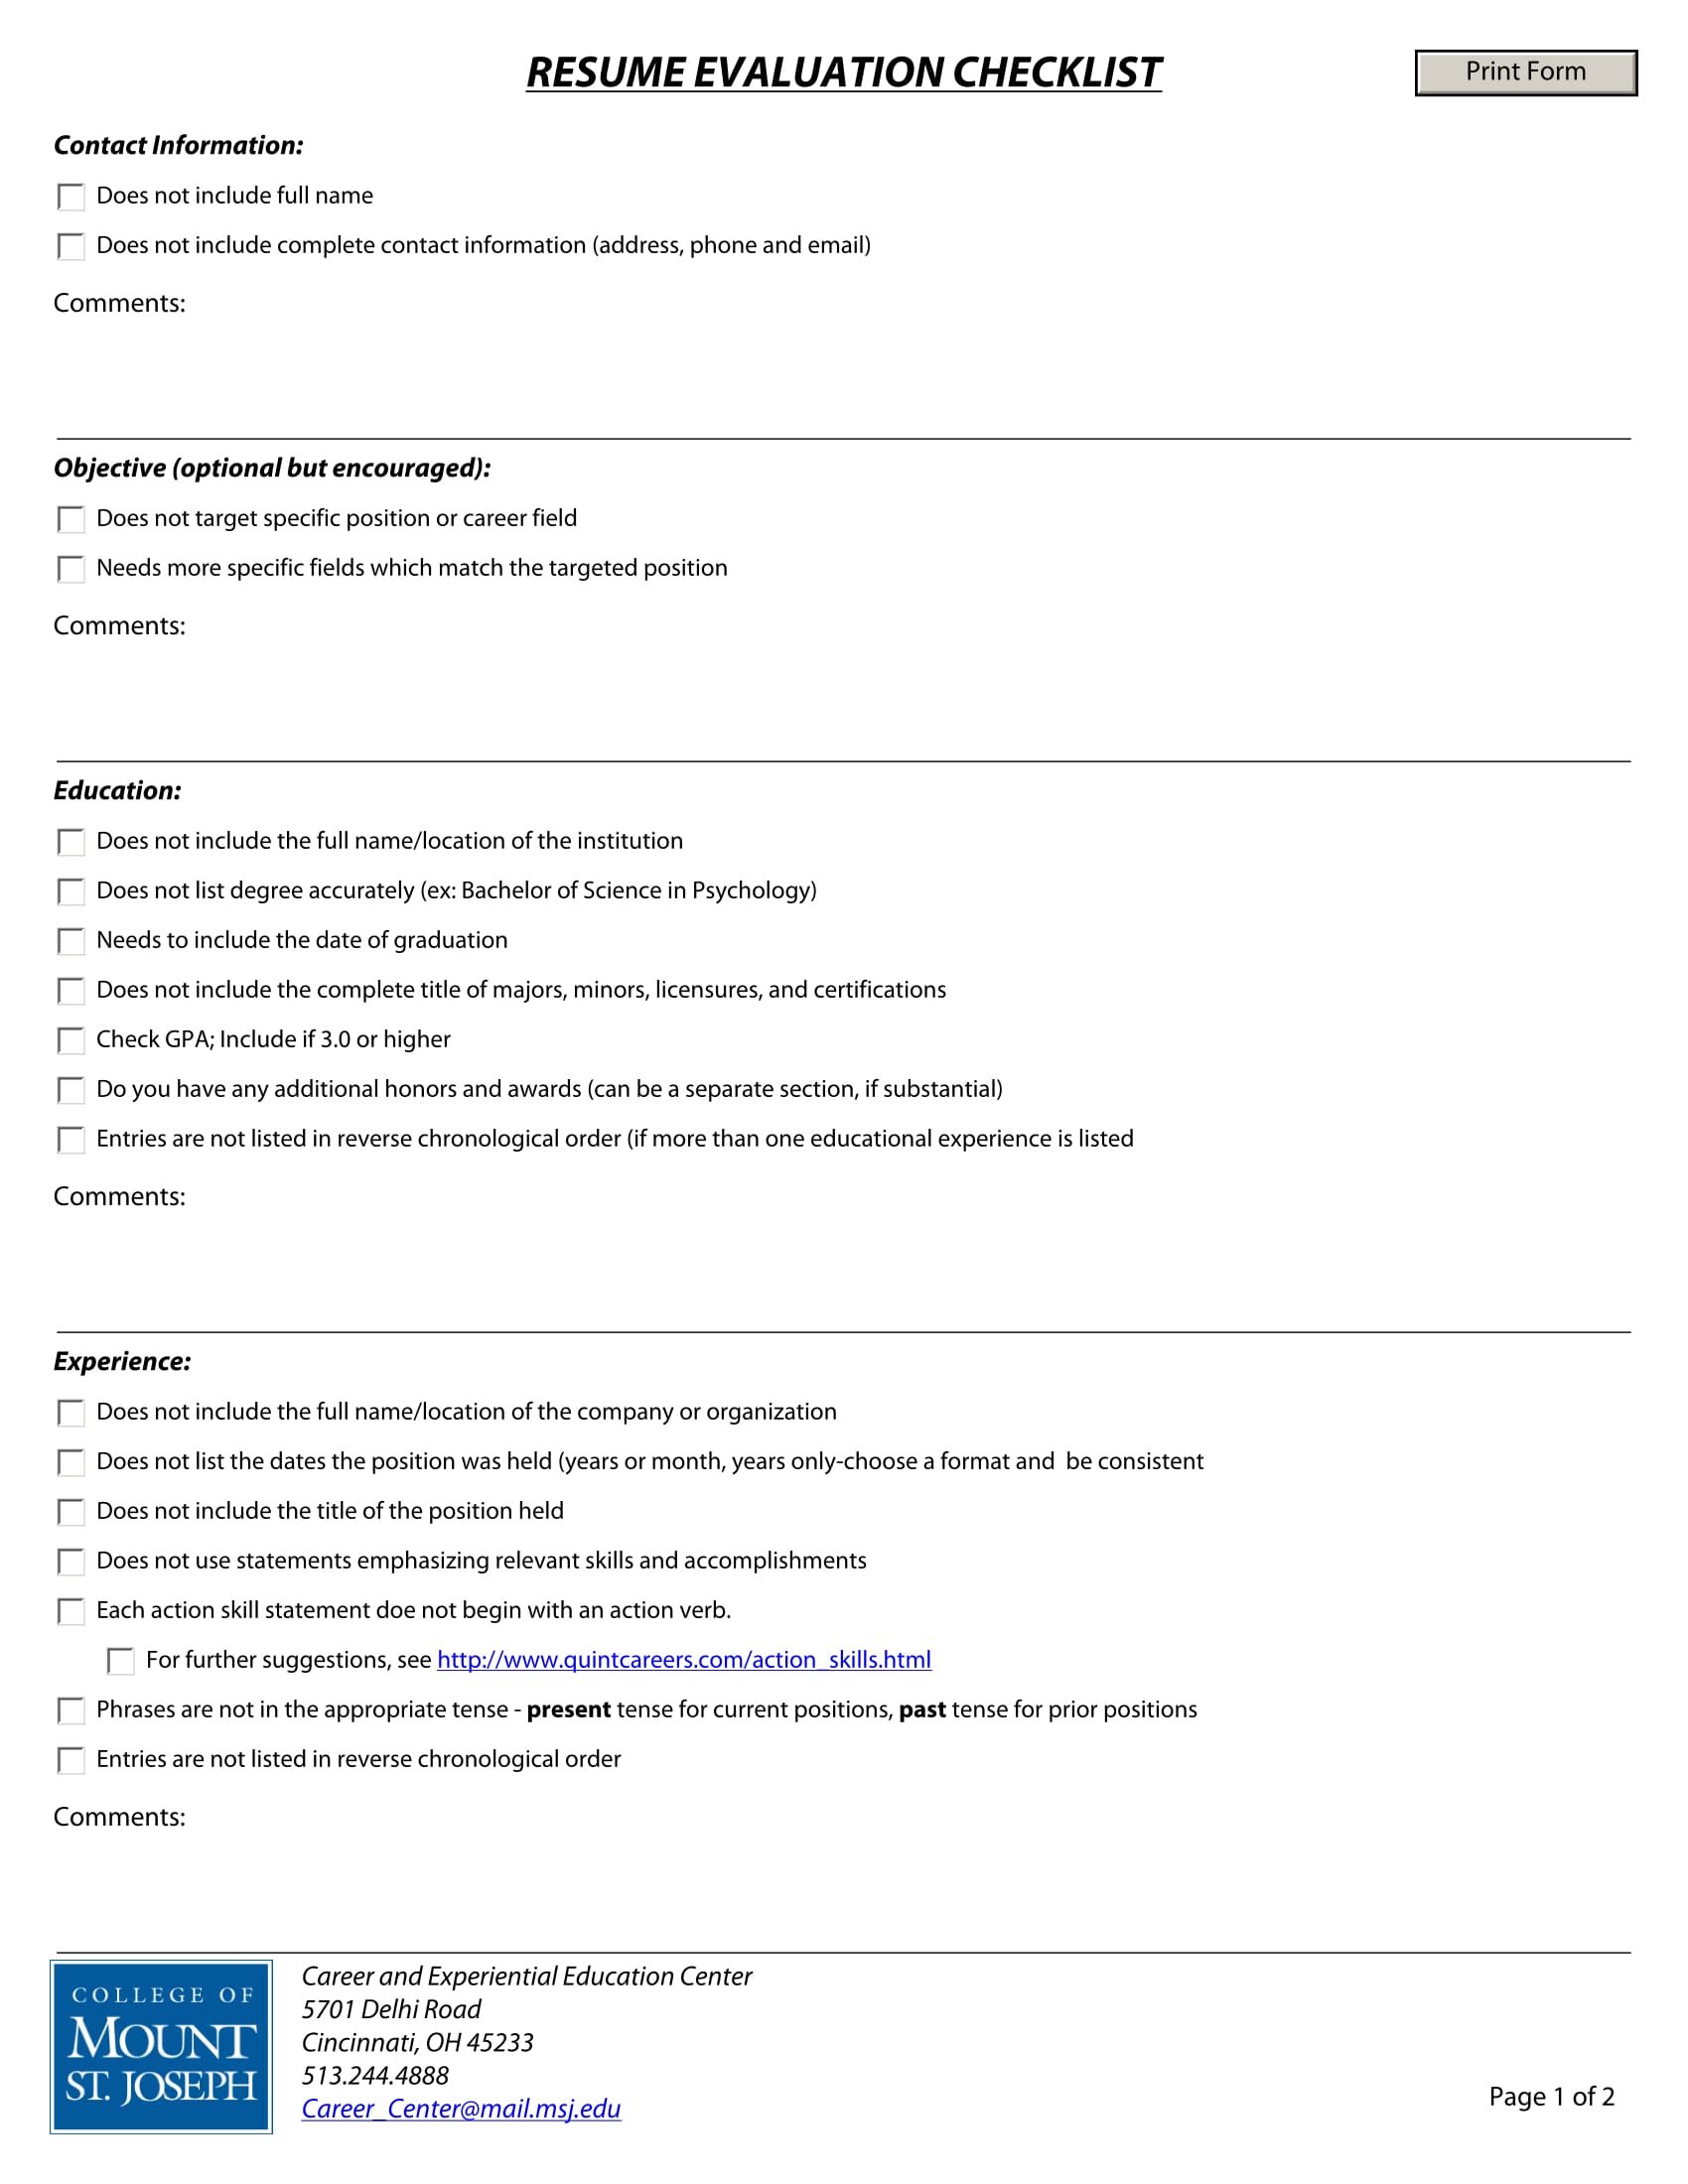 14  resume evaluation forms